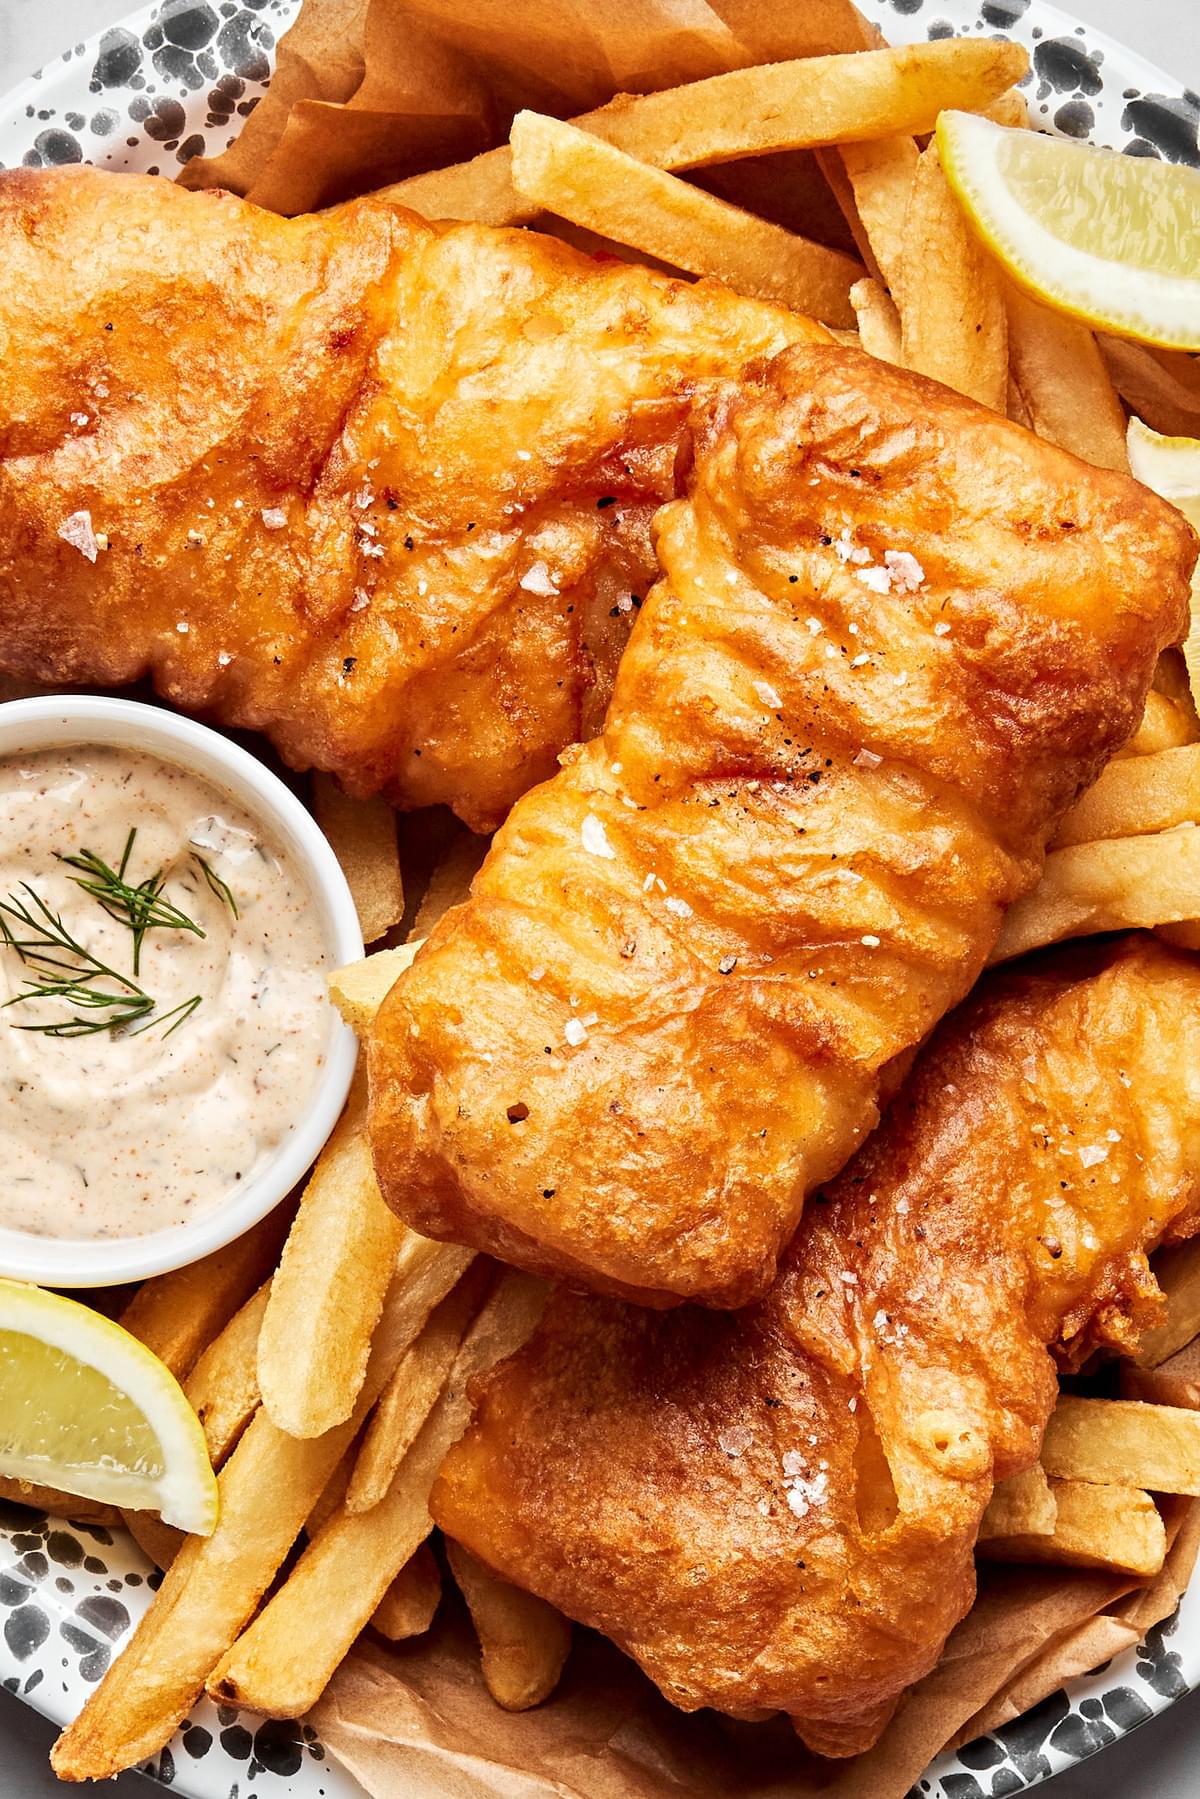 homemade beer battered fish served with french fries, lemon wedges and tartar sauce